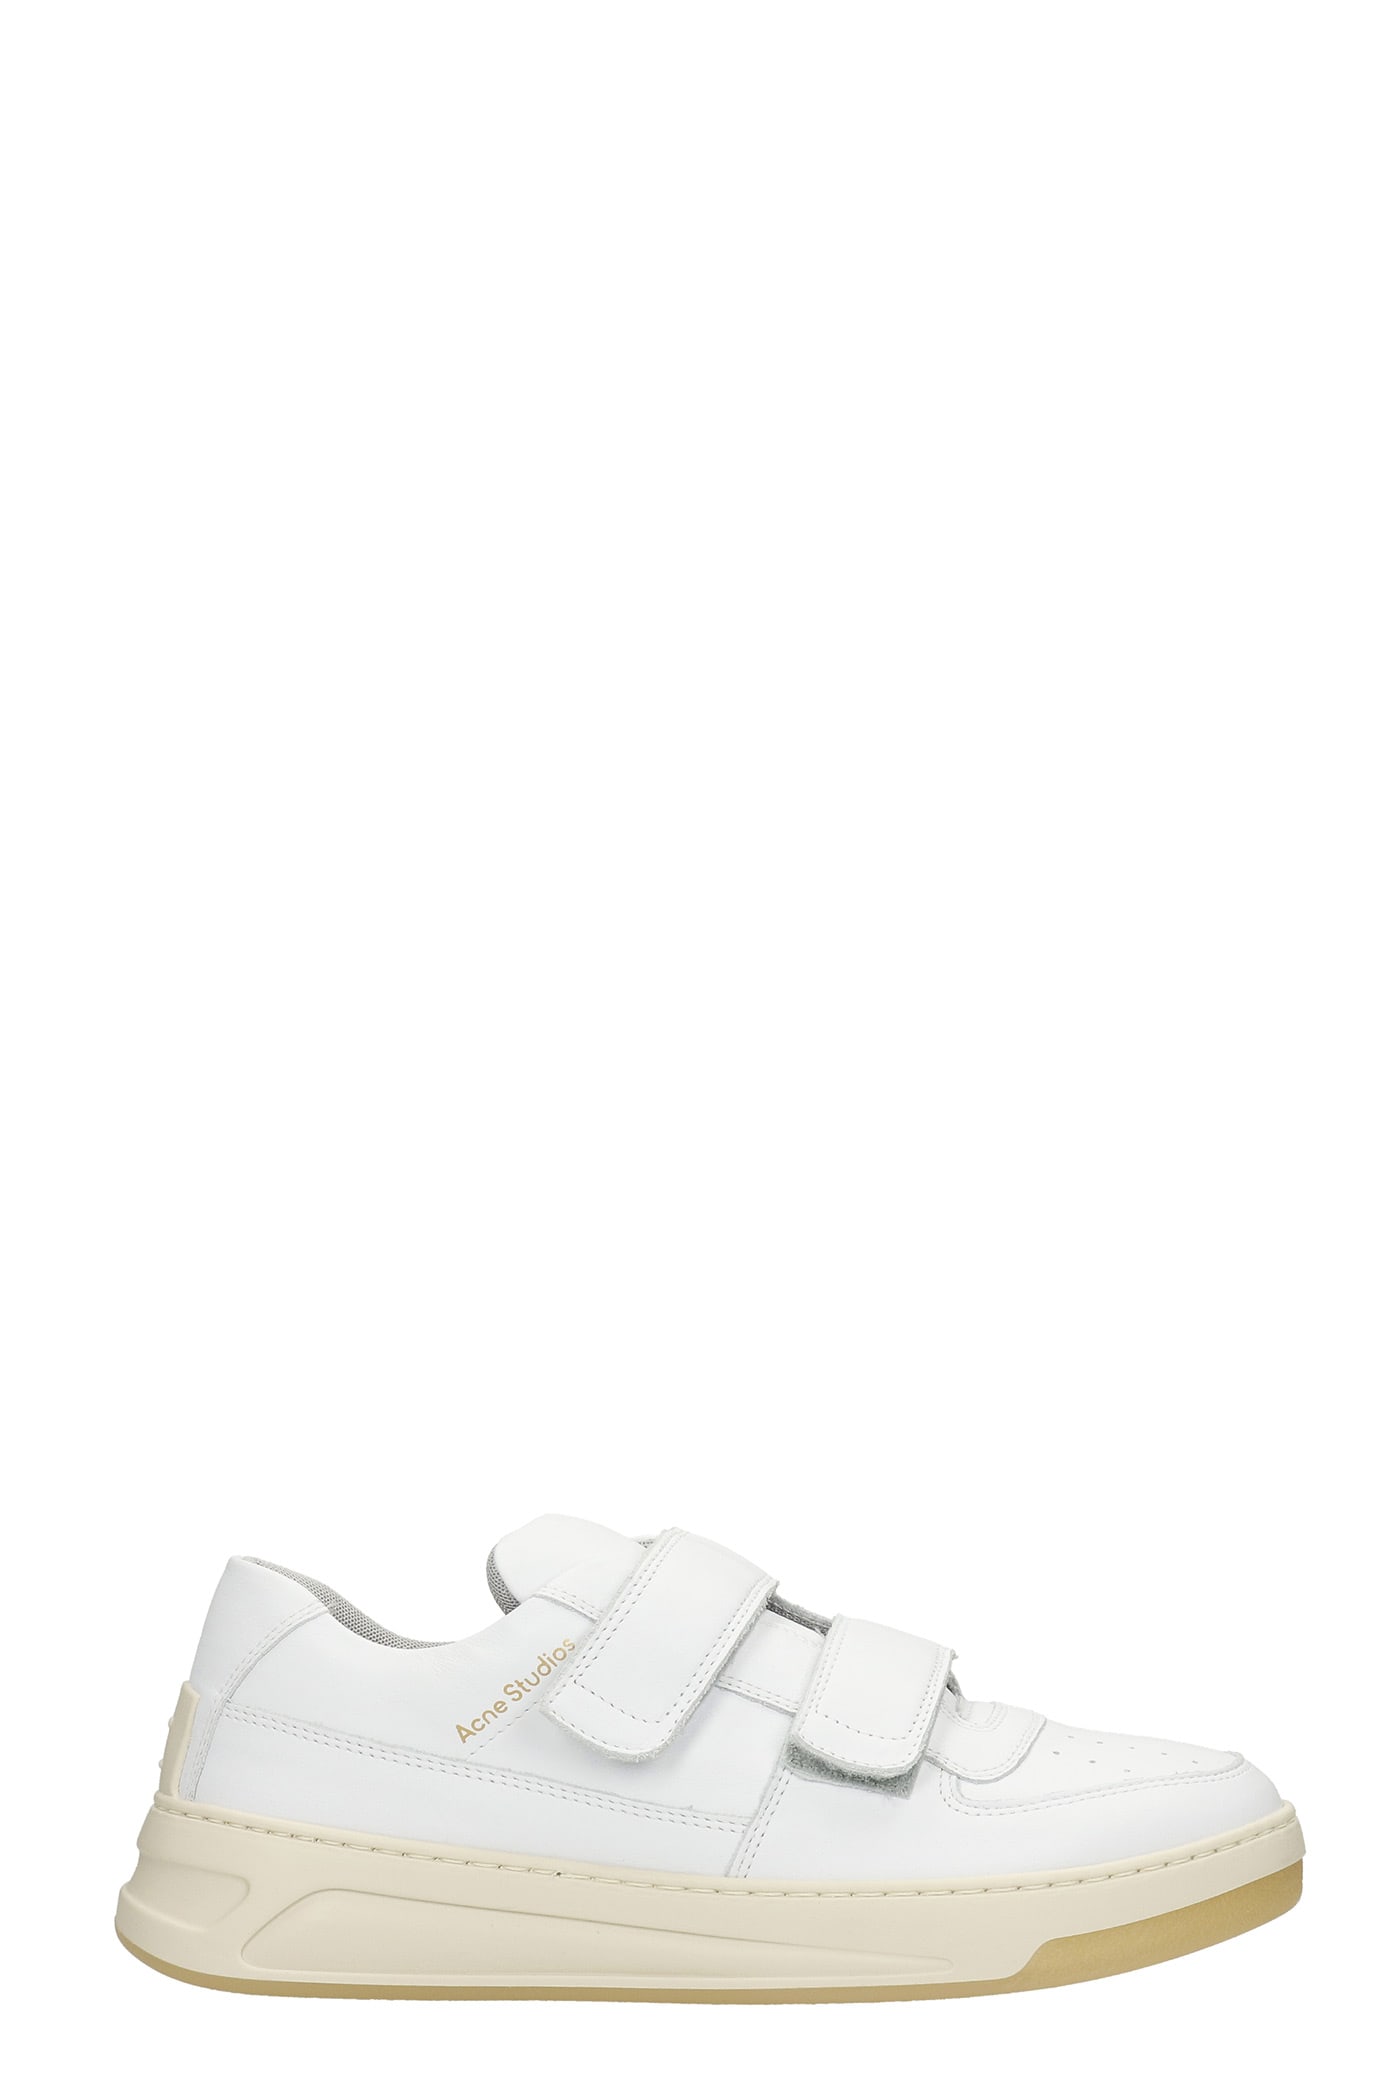 Acne Studios Perey Sneakers In White Leather